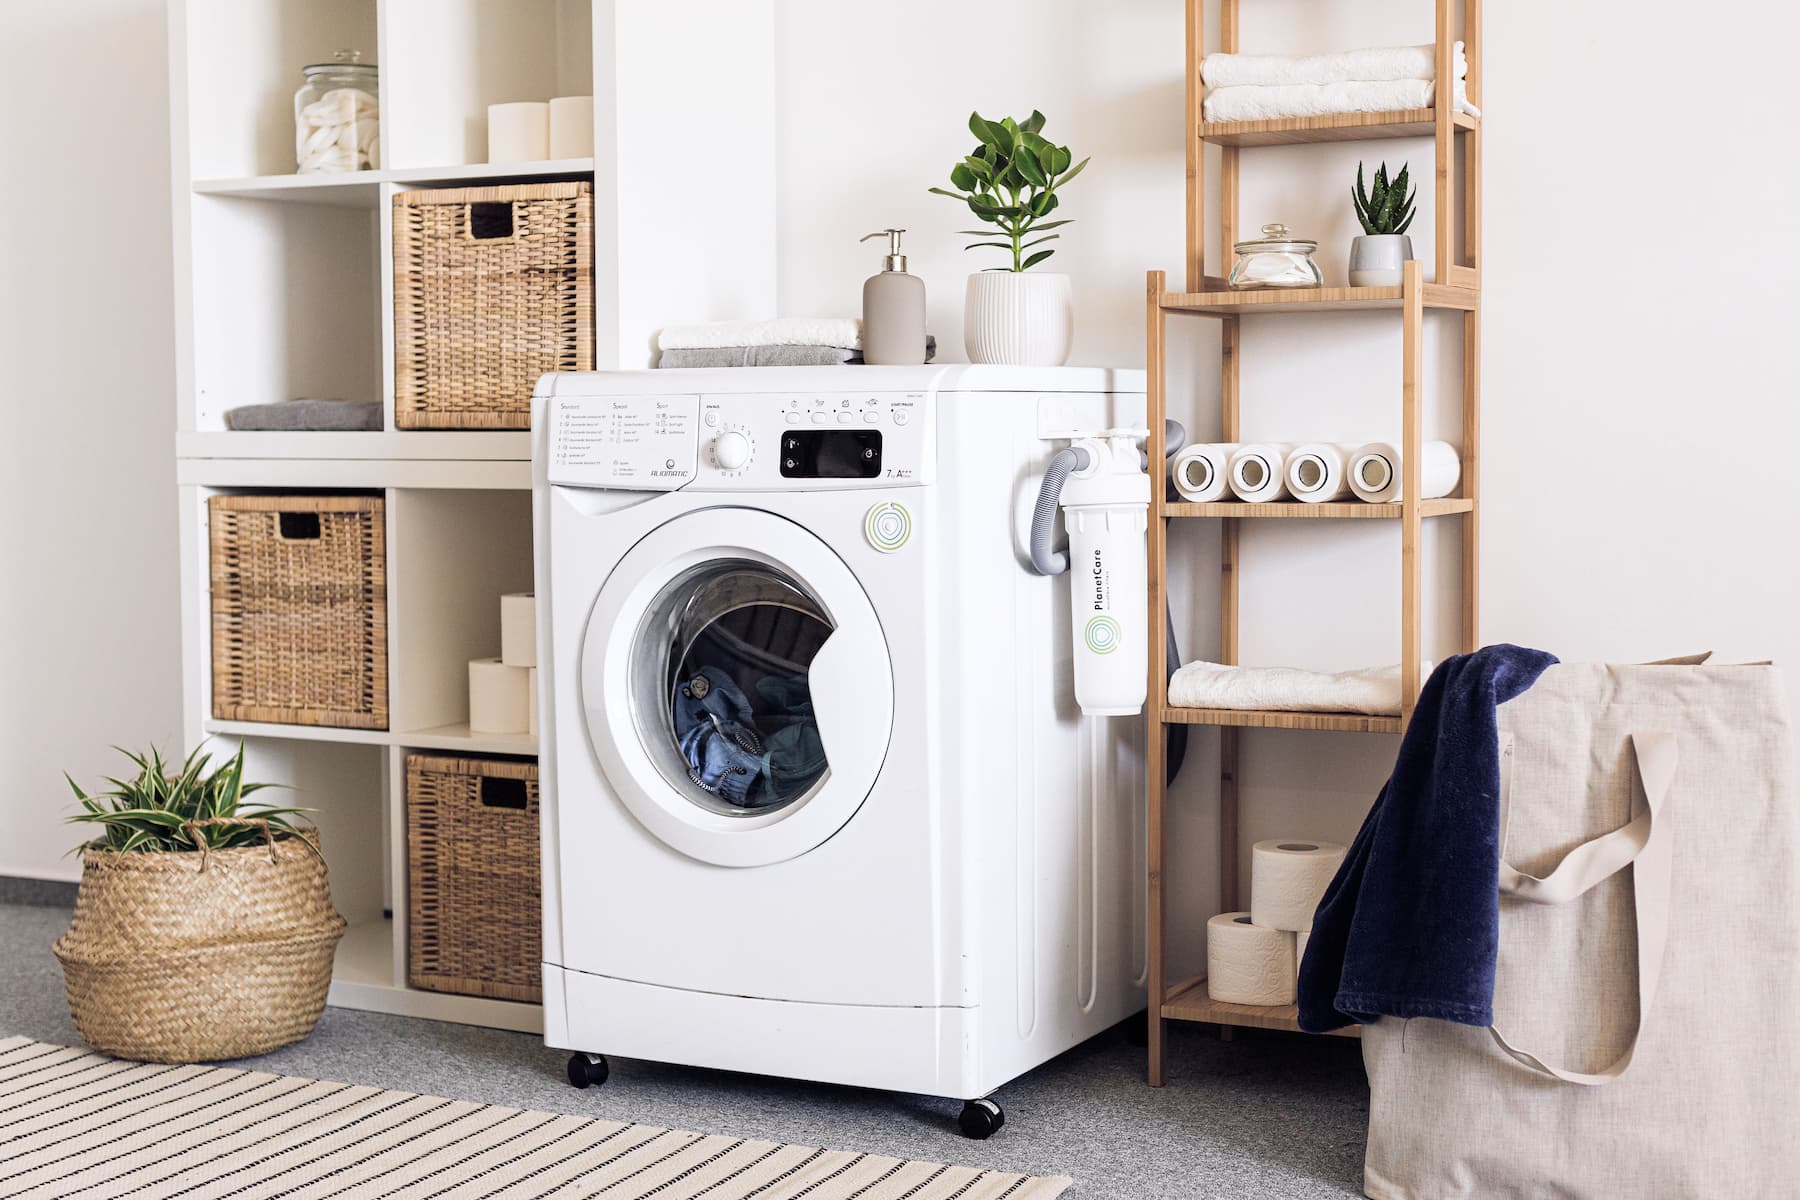 Boho Laundry Room with a white washer and shelves